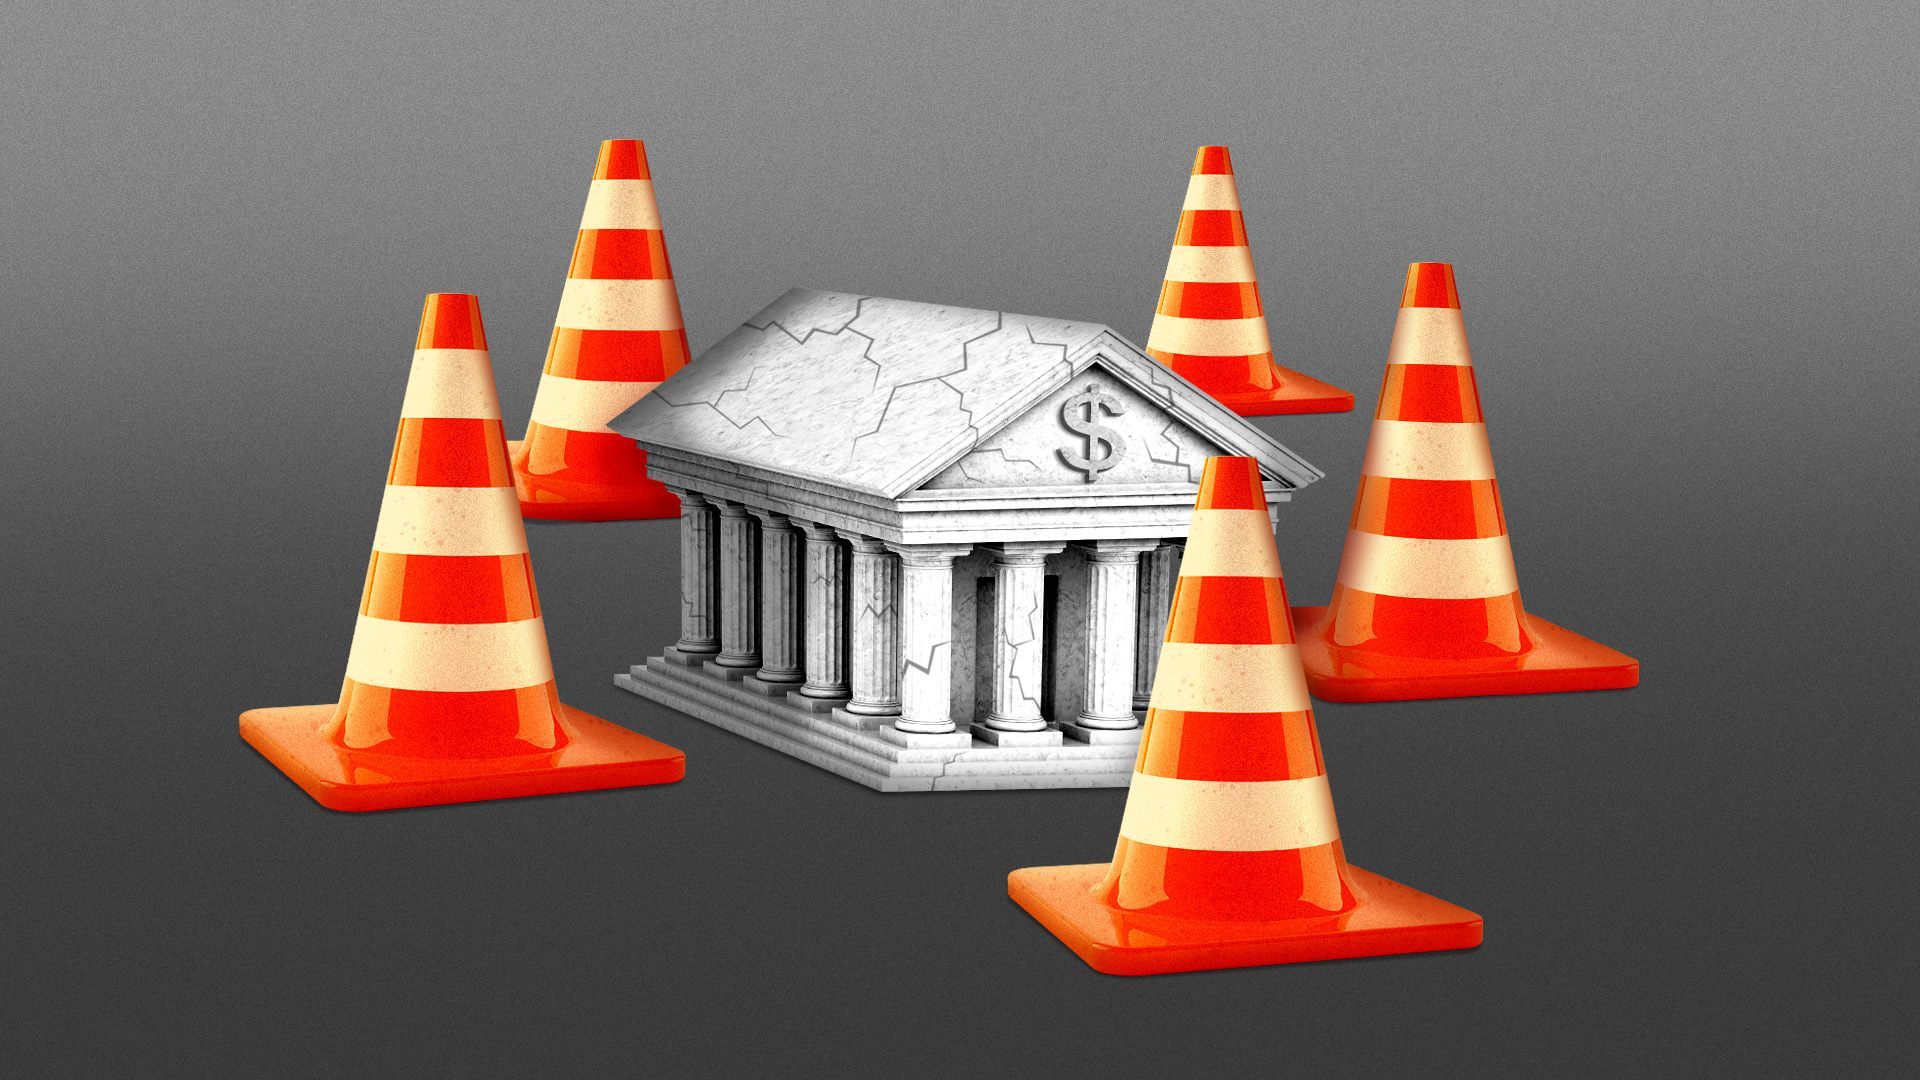 Illustration of a small cracked bank surrounded by traffic cones